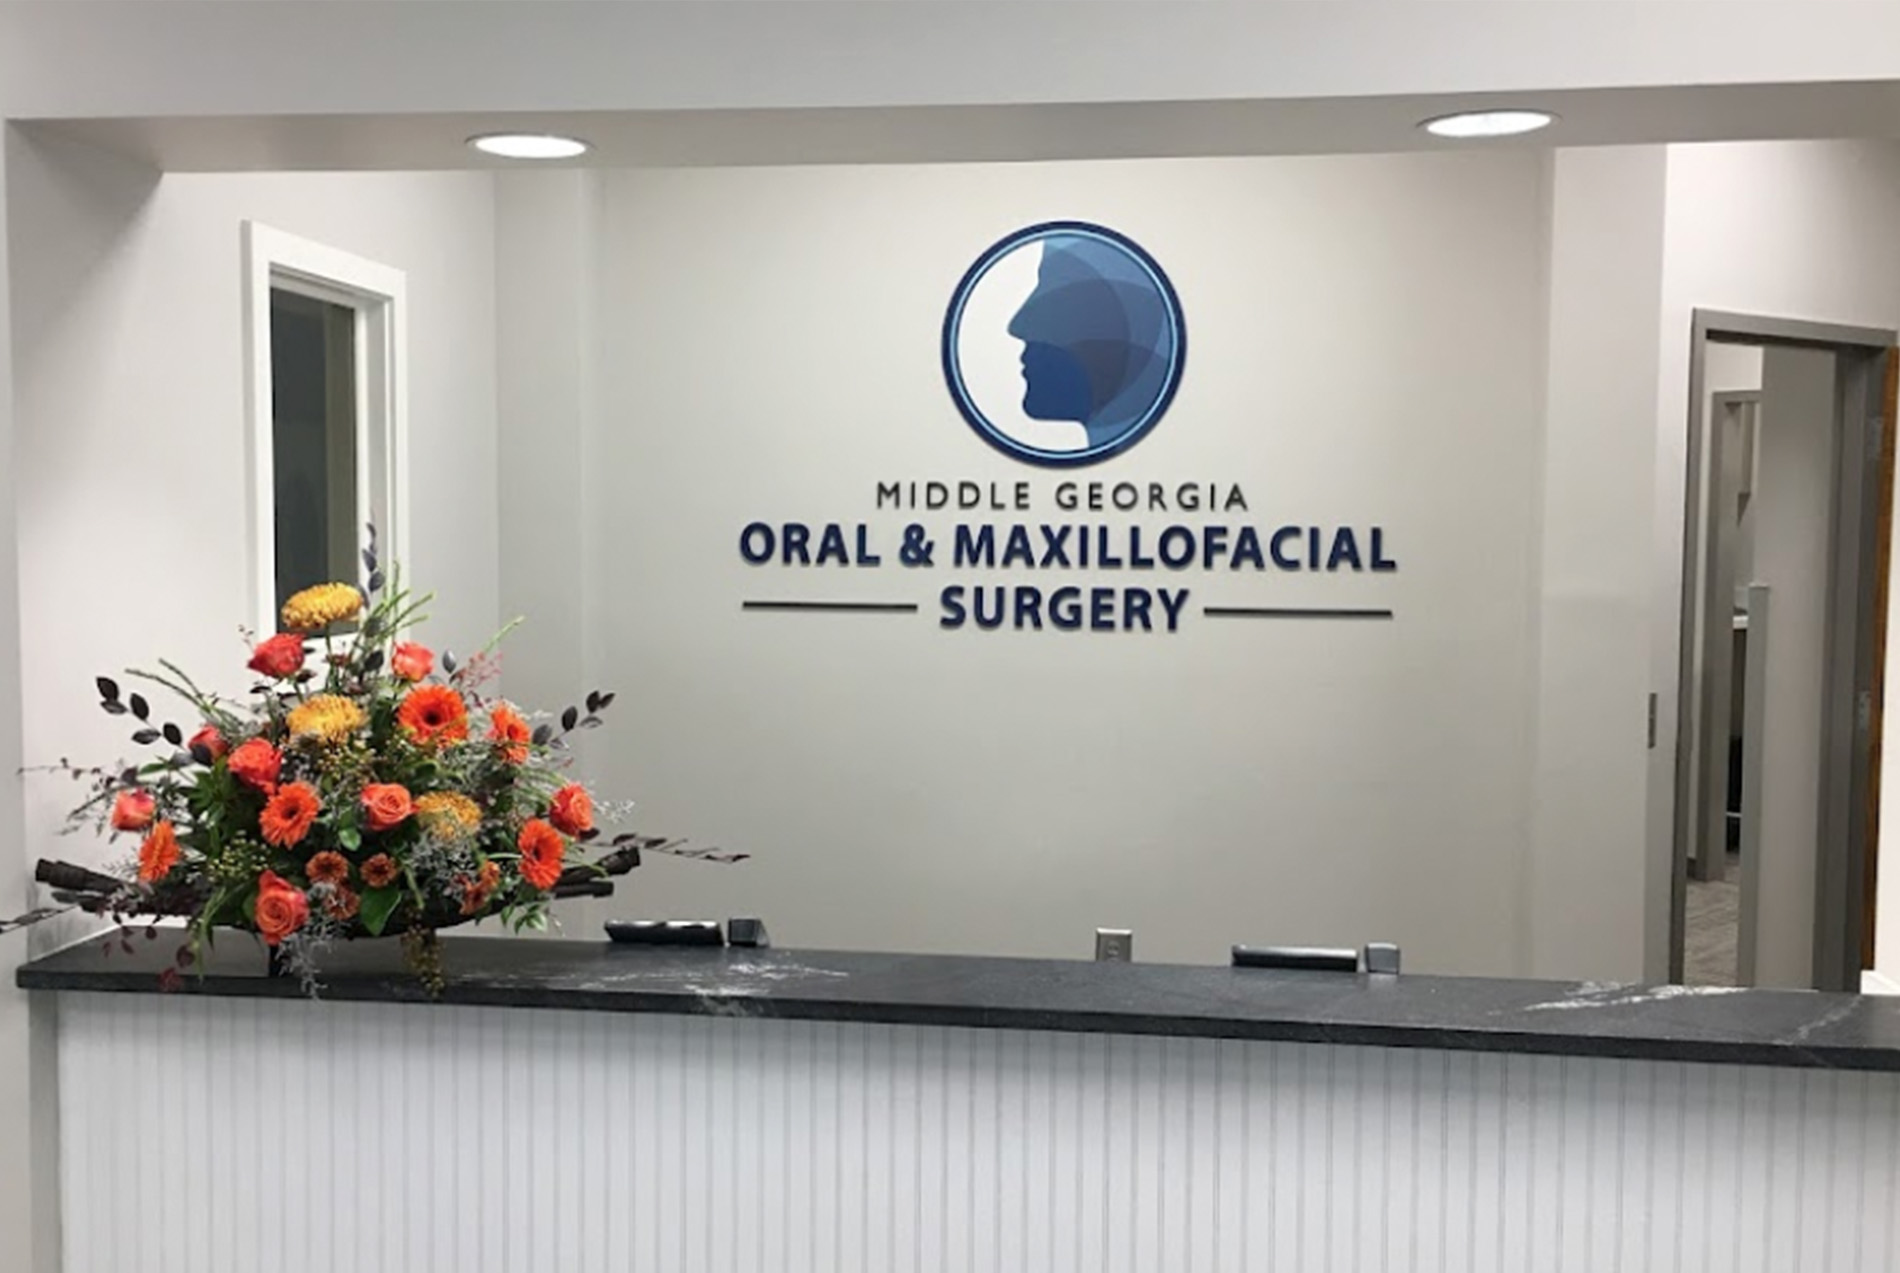 Middle Georgia Oral and Maxillofacial Surgery | Implant Dentistry, Mouth Ulcers and Orthognathic Surgery